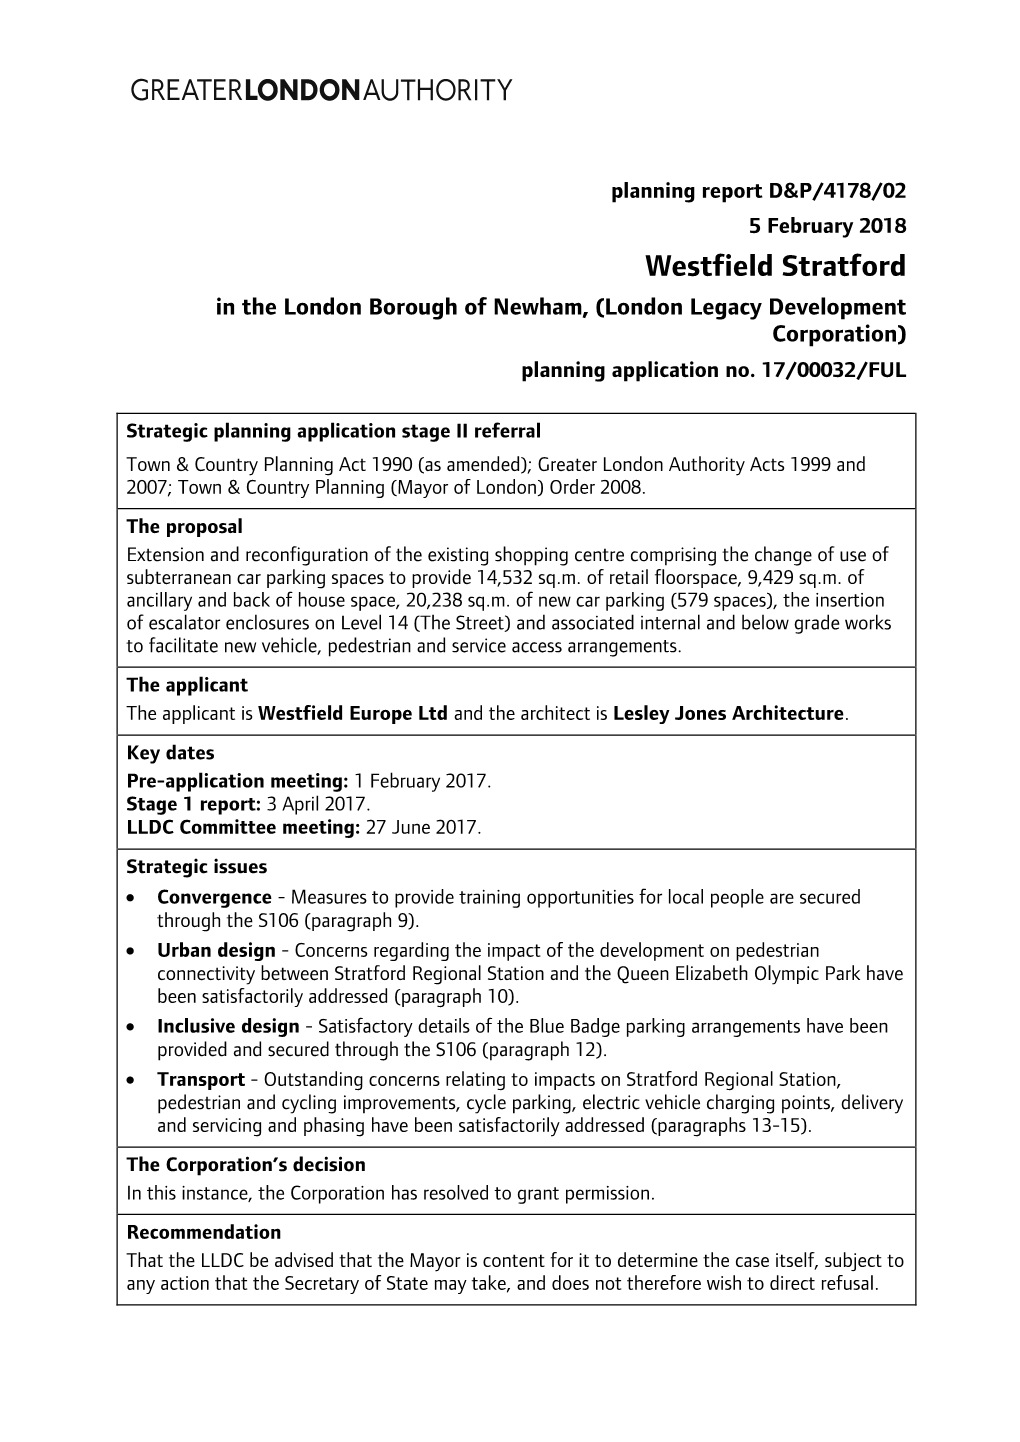 Westfield Stratford in the London Borough of Newham, (London Legacy Development Corporation) Planning Application No